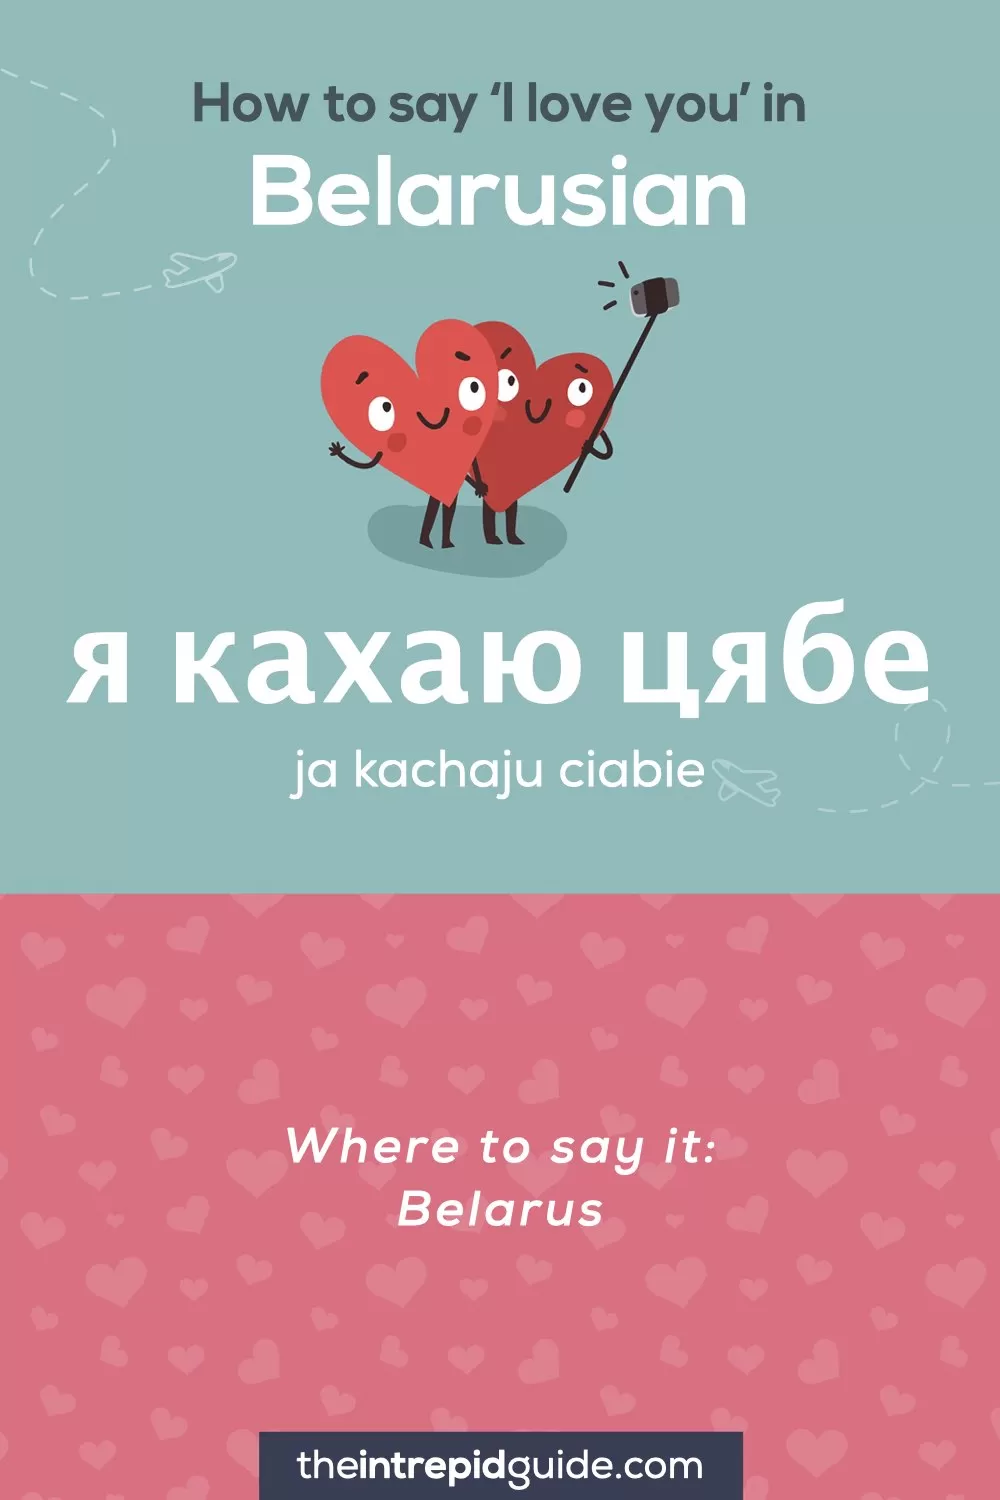 How to say I love you in different languages - Belarusian - я кахаю цябе